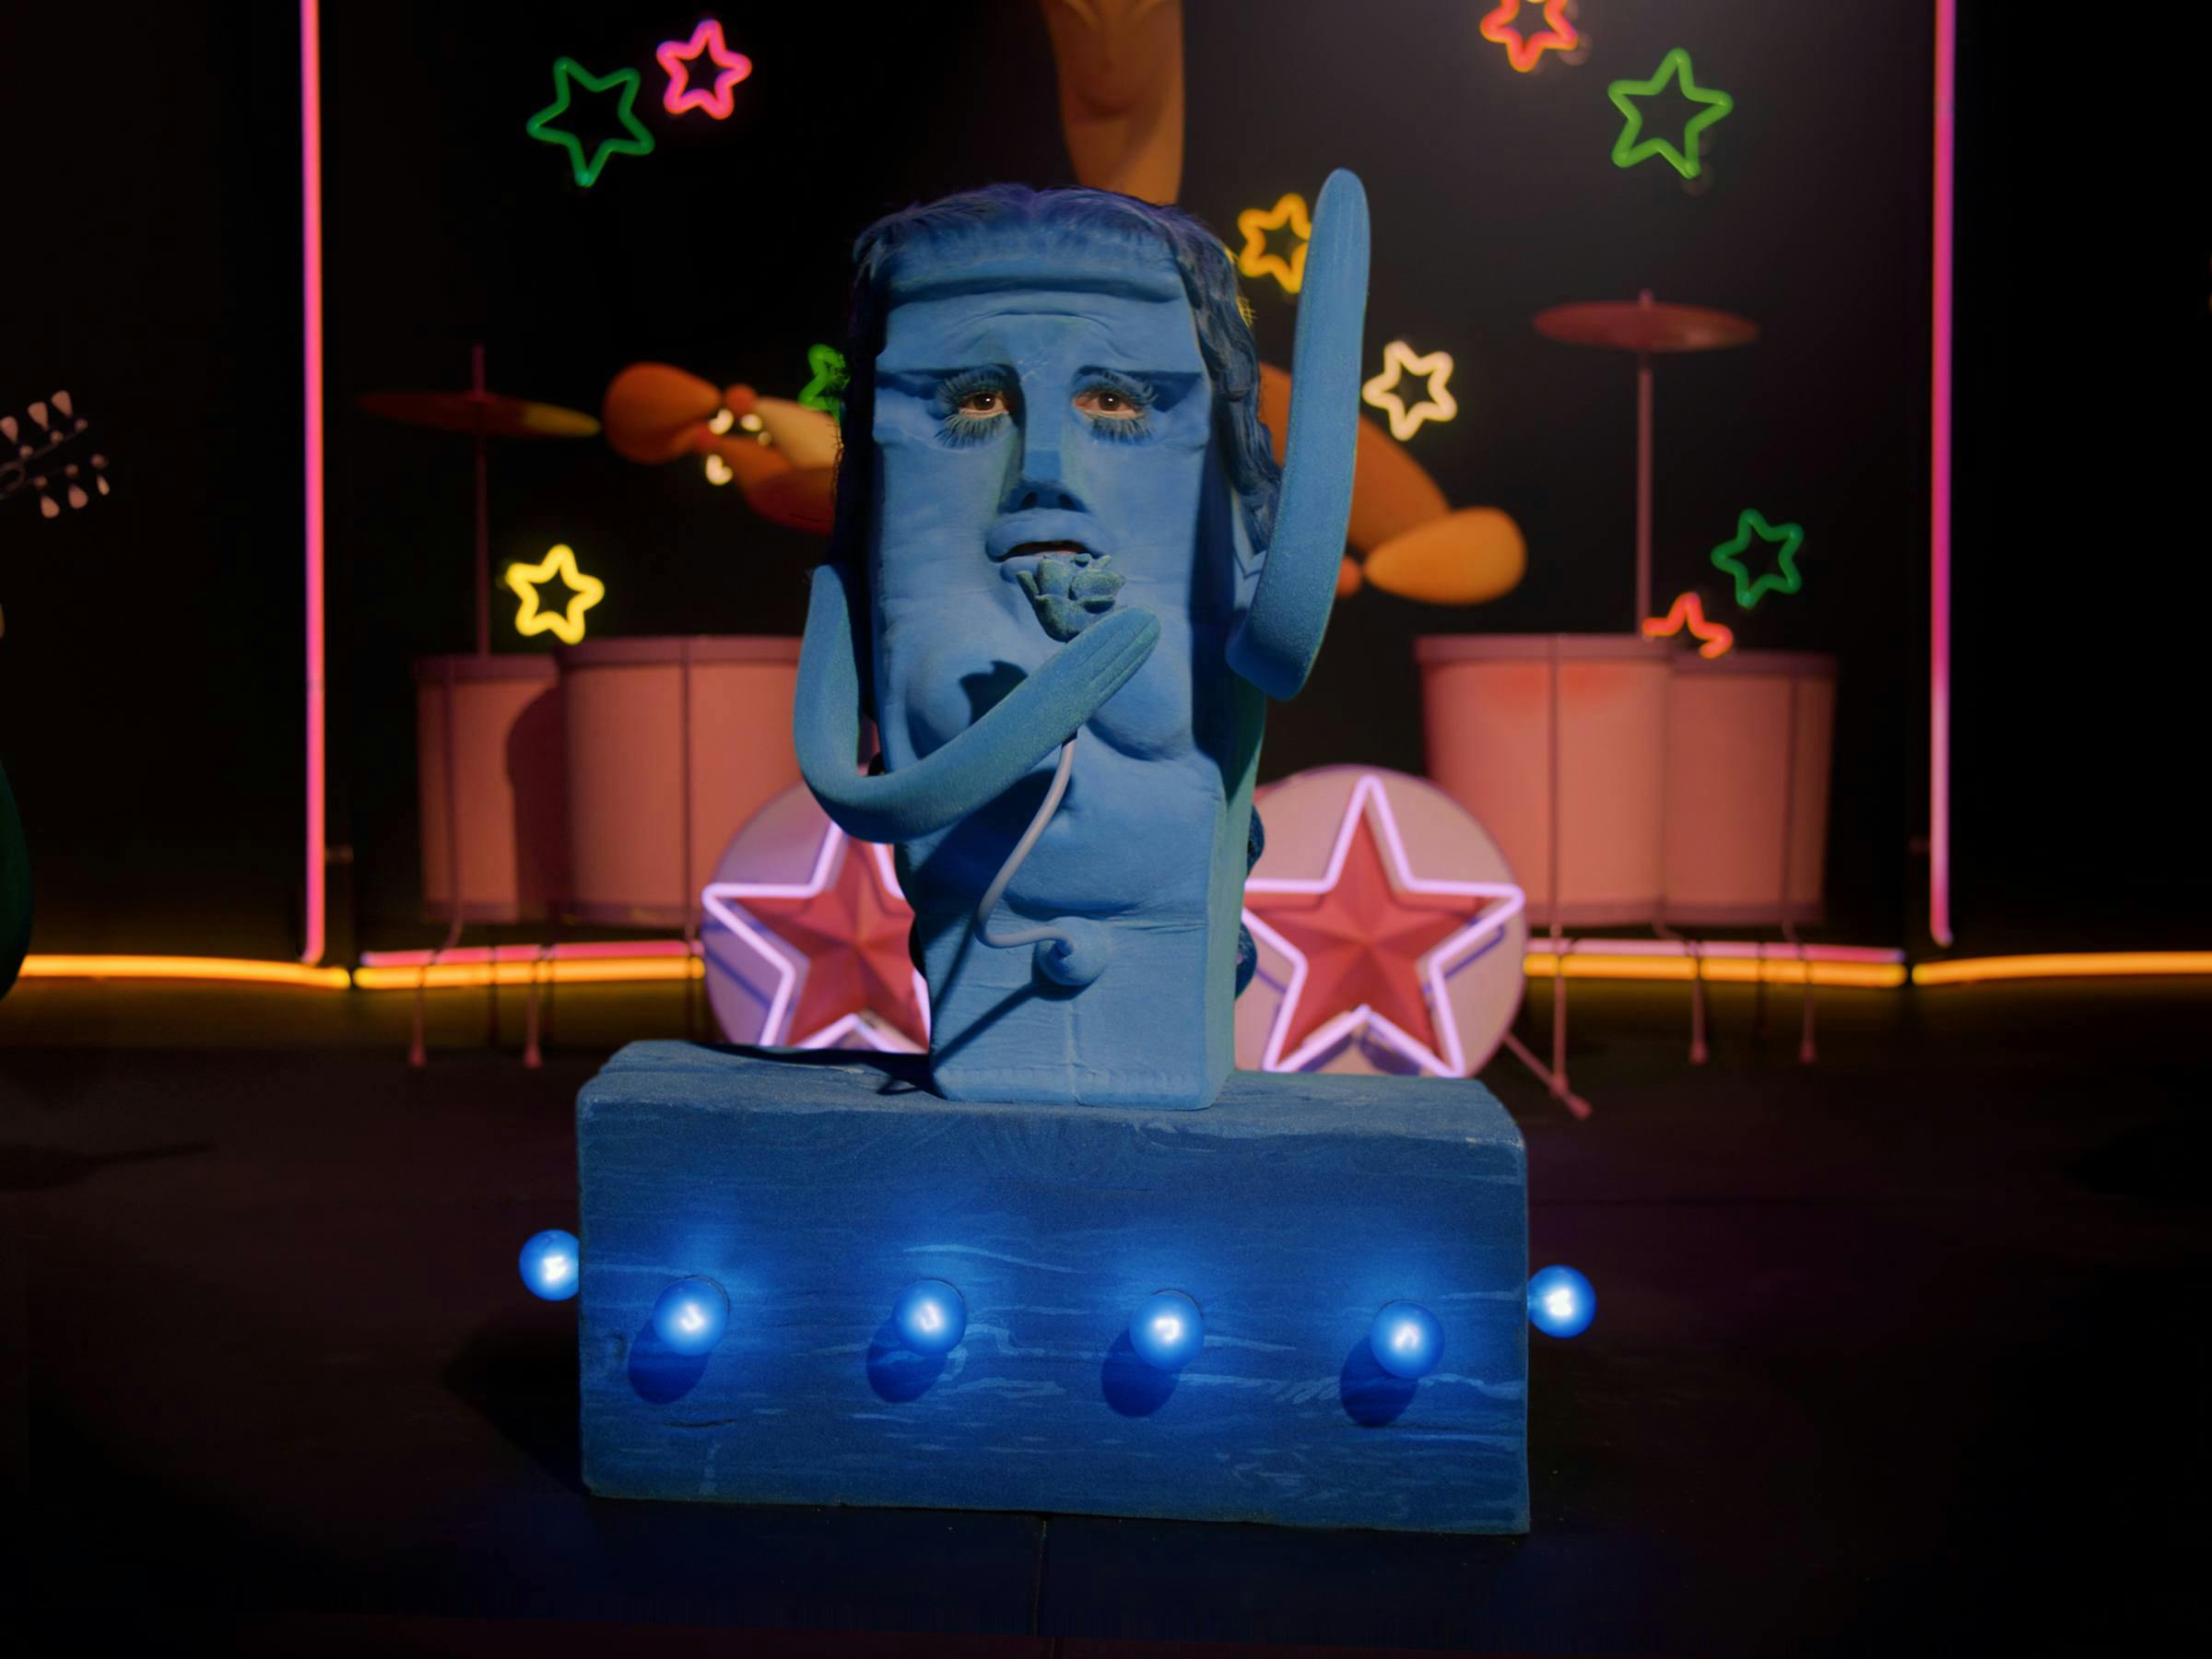 a blue plasticine figure is atop a blue box that has blue light bulbs protruding from it. Pink, yellow and green neon stars are visible as well as 2 drum kits in background. 